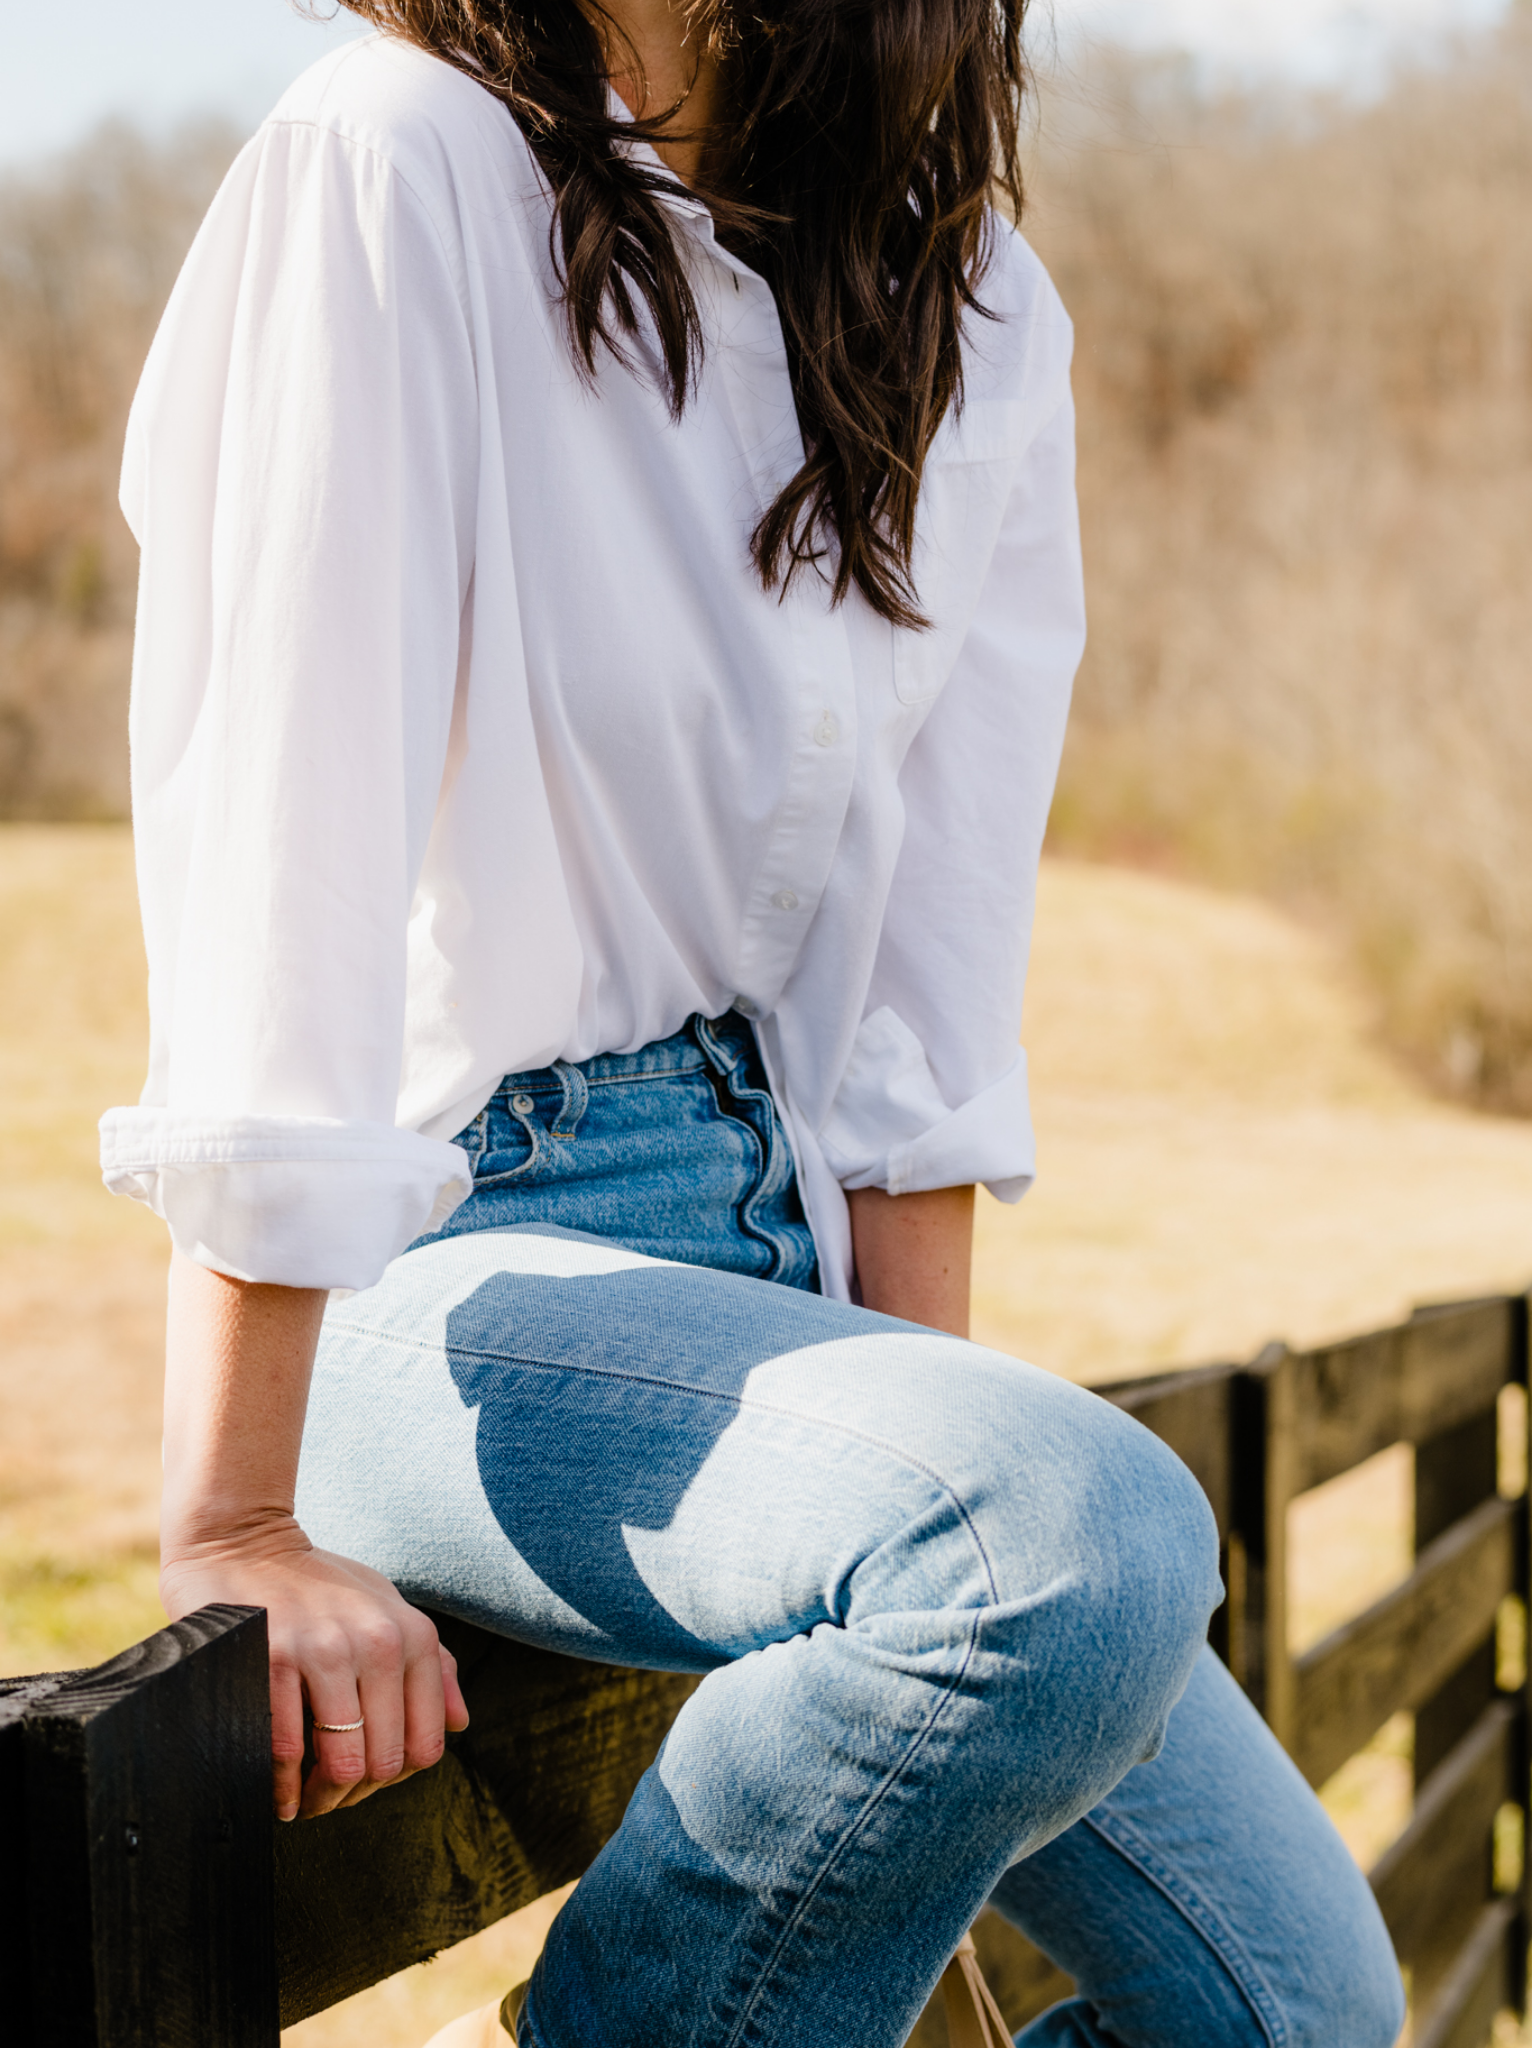 Woman in white blouse and blue jeans sitting on a wooden fence.